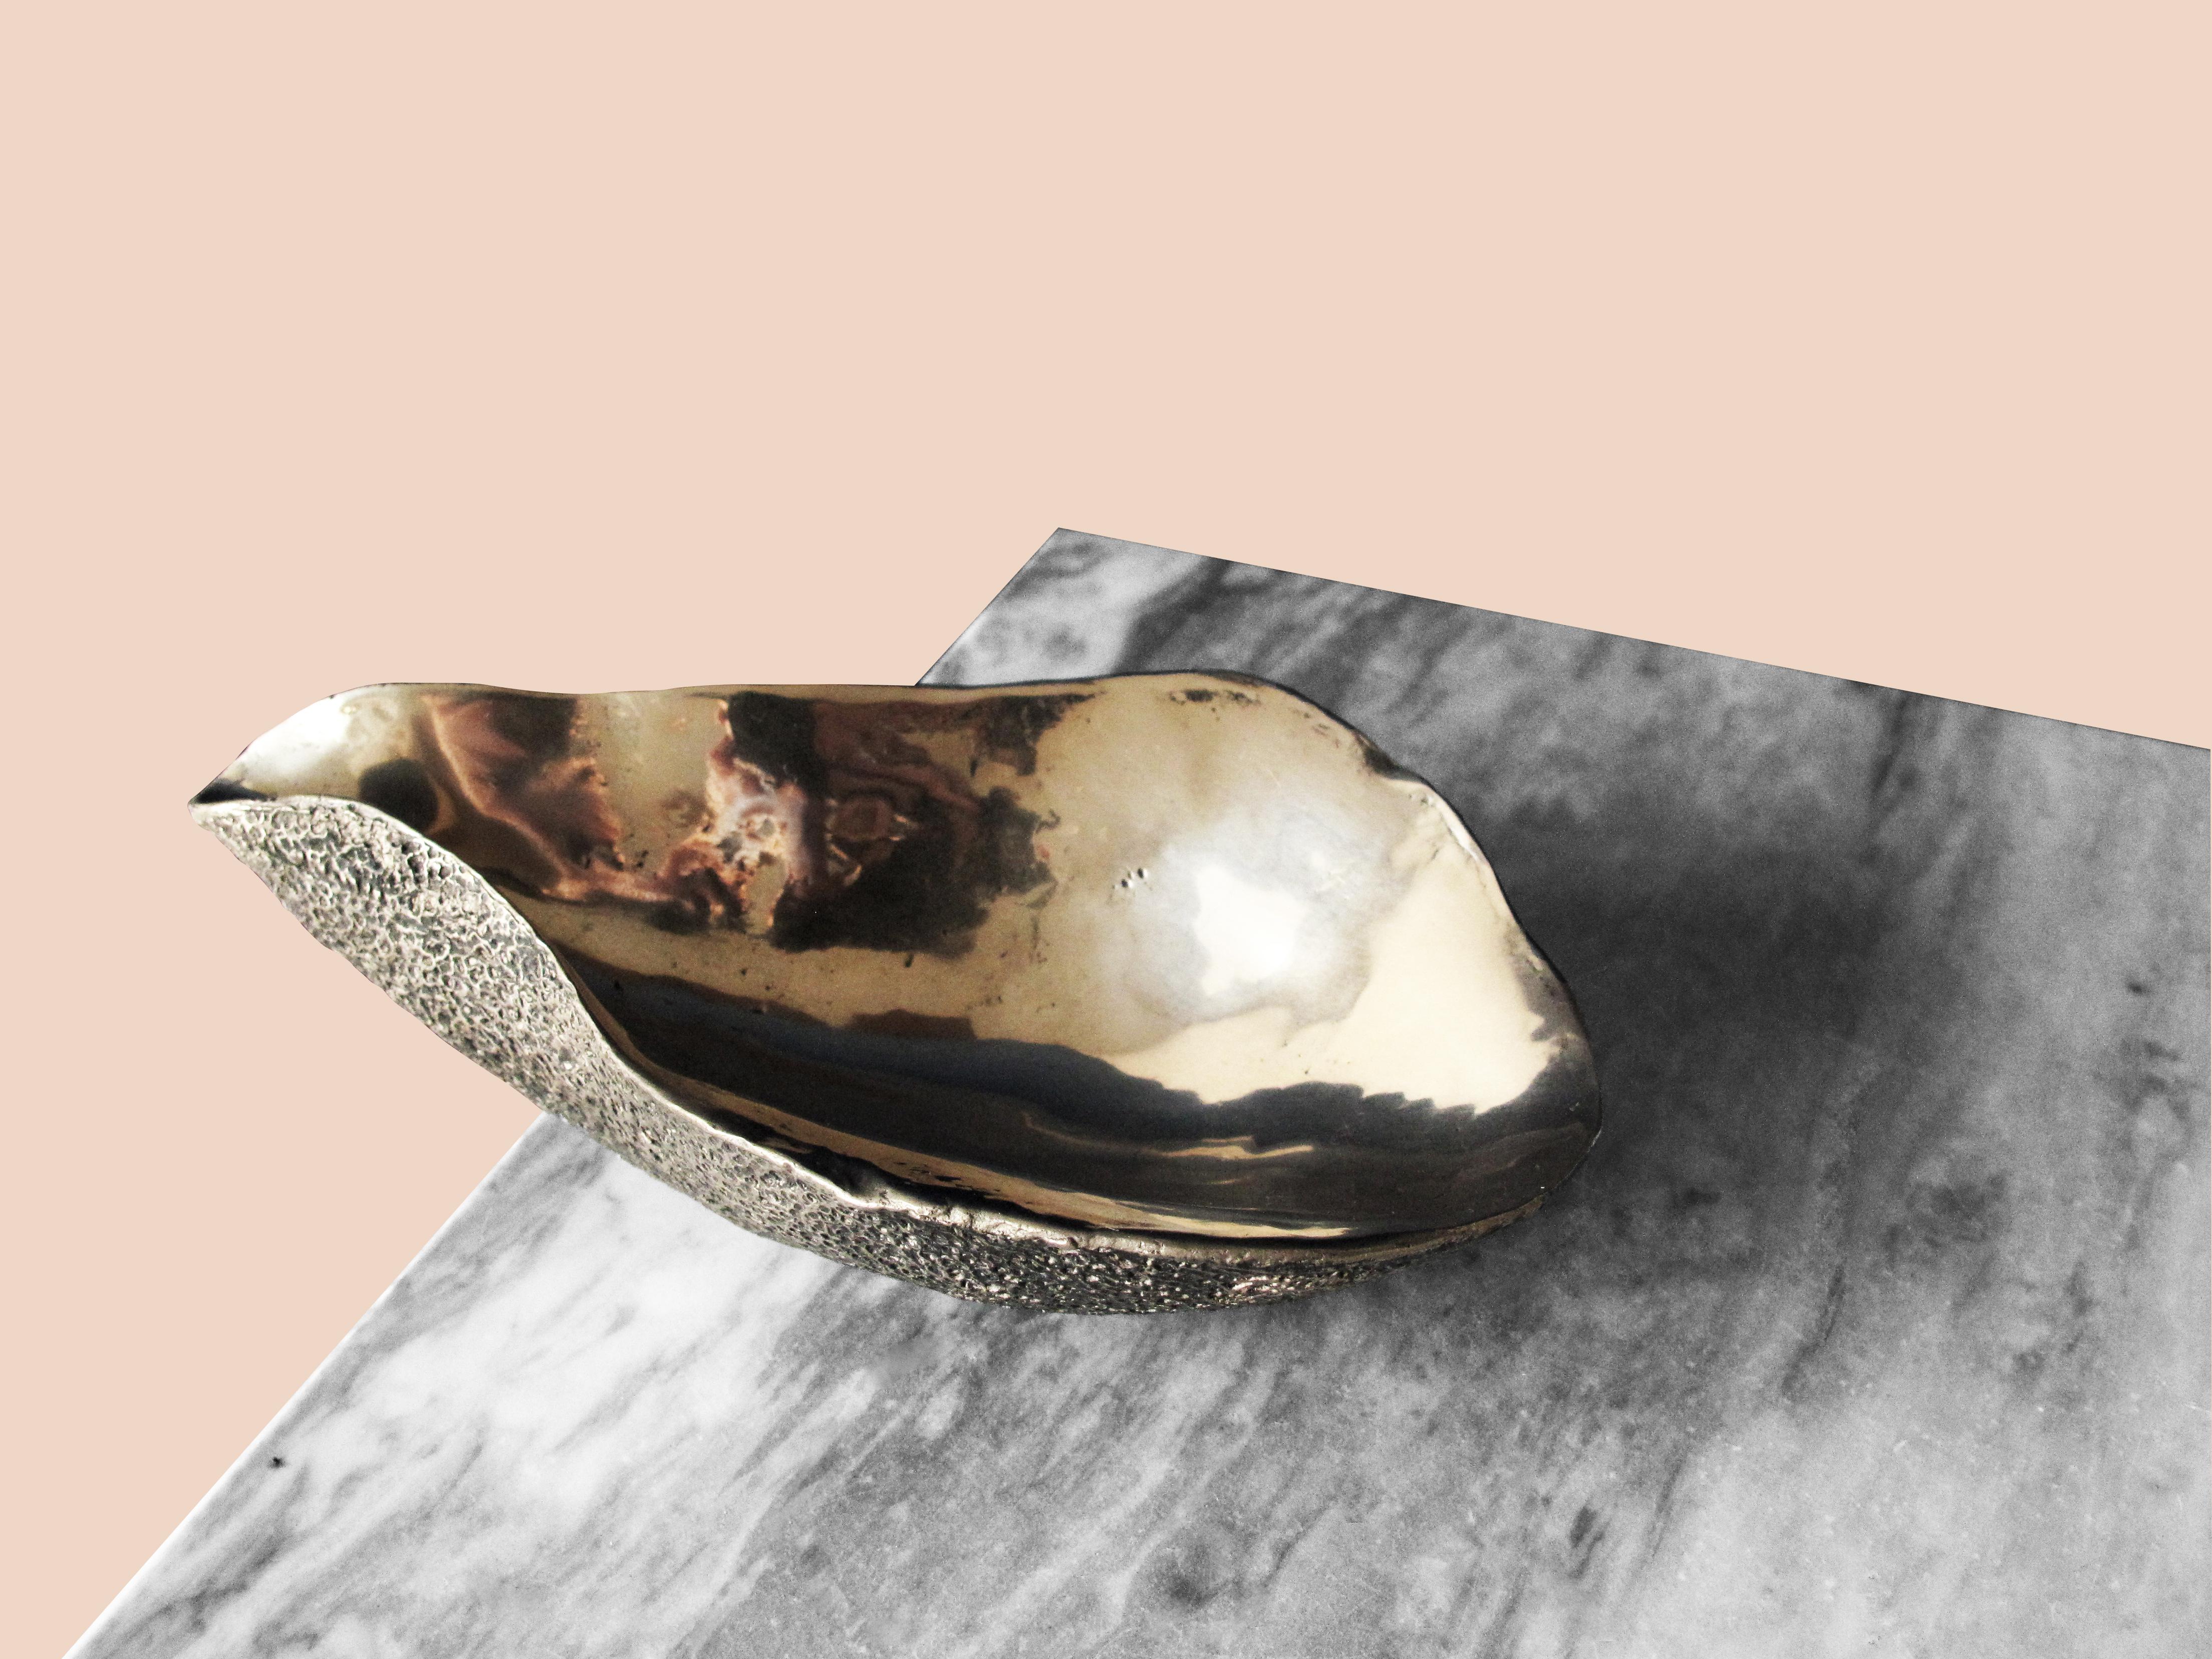 This solid bronze dish is an interior embellishment. 
The organic shape is sculpted by hand, richly textured on the outside and polished on the inside. Inspired by the feminine and evocative shapes of oyster shells, this home accessory will add a